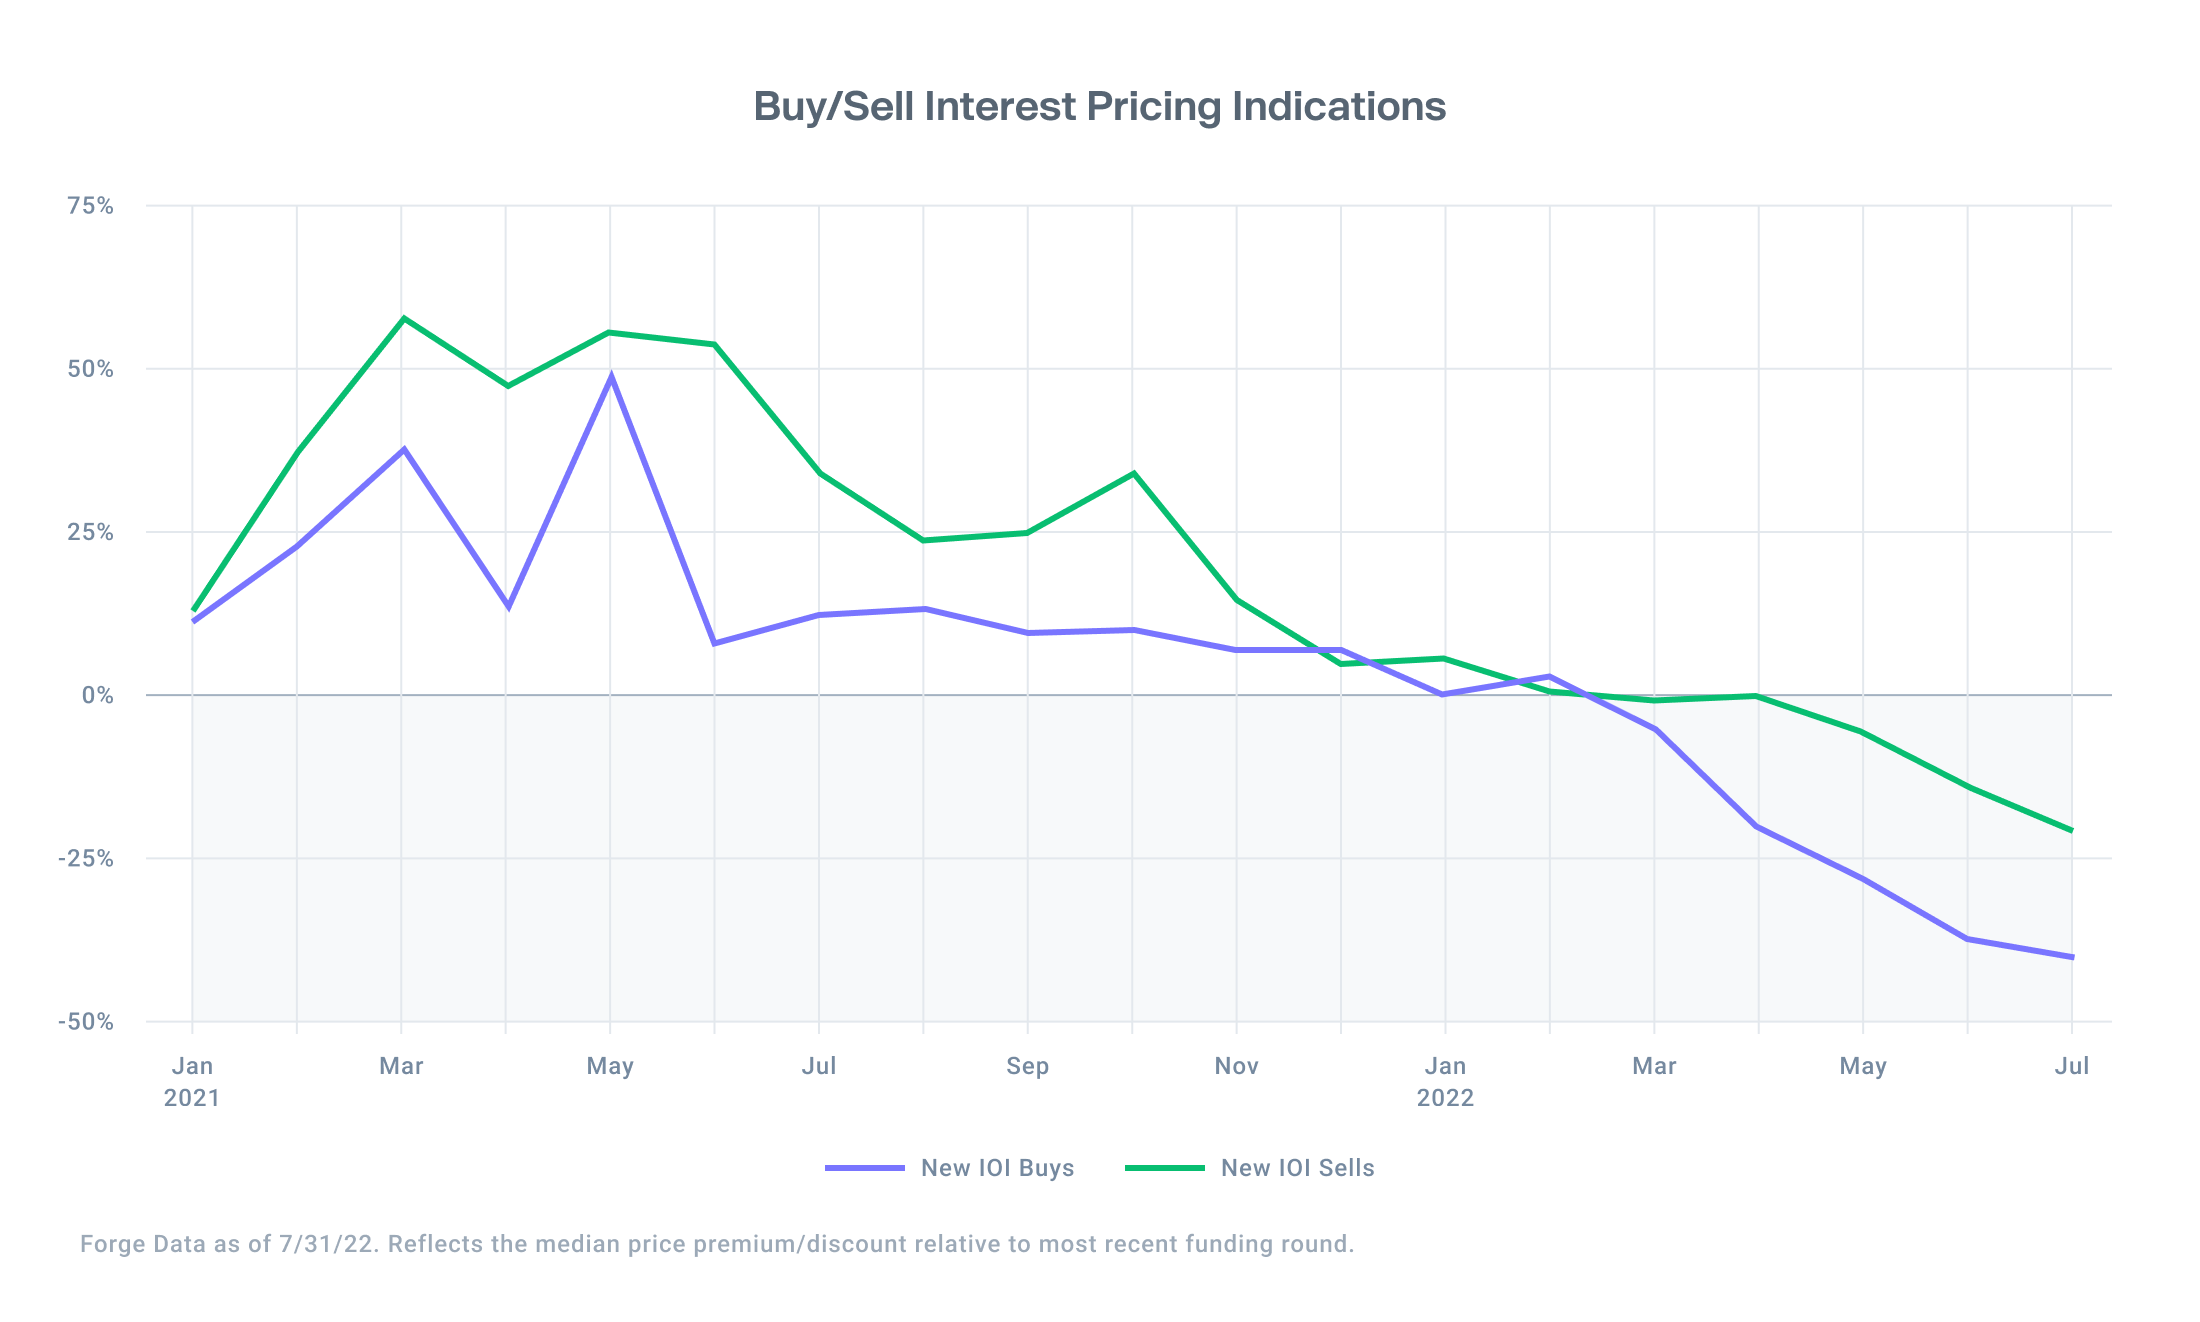 Buy/Sell Interest pricing indications